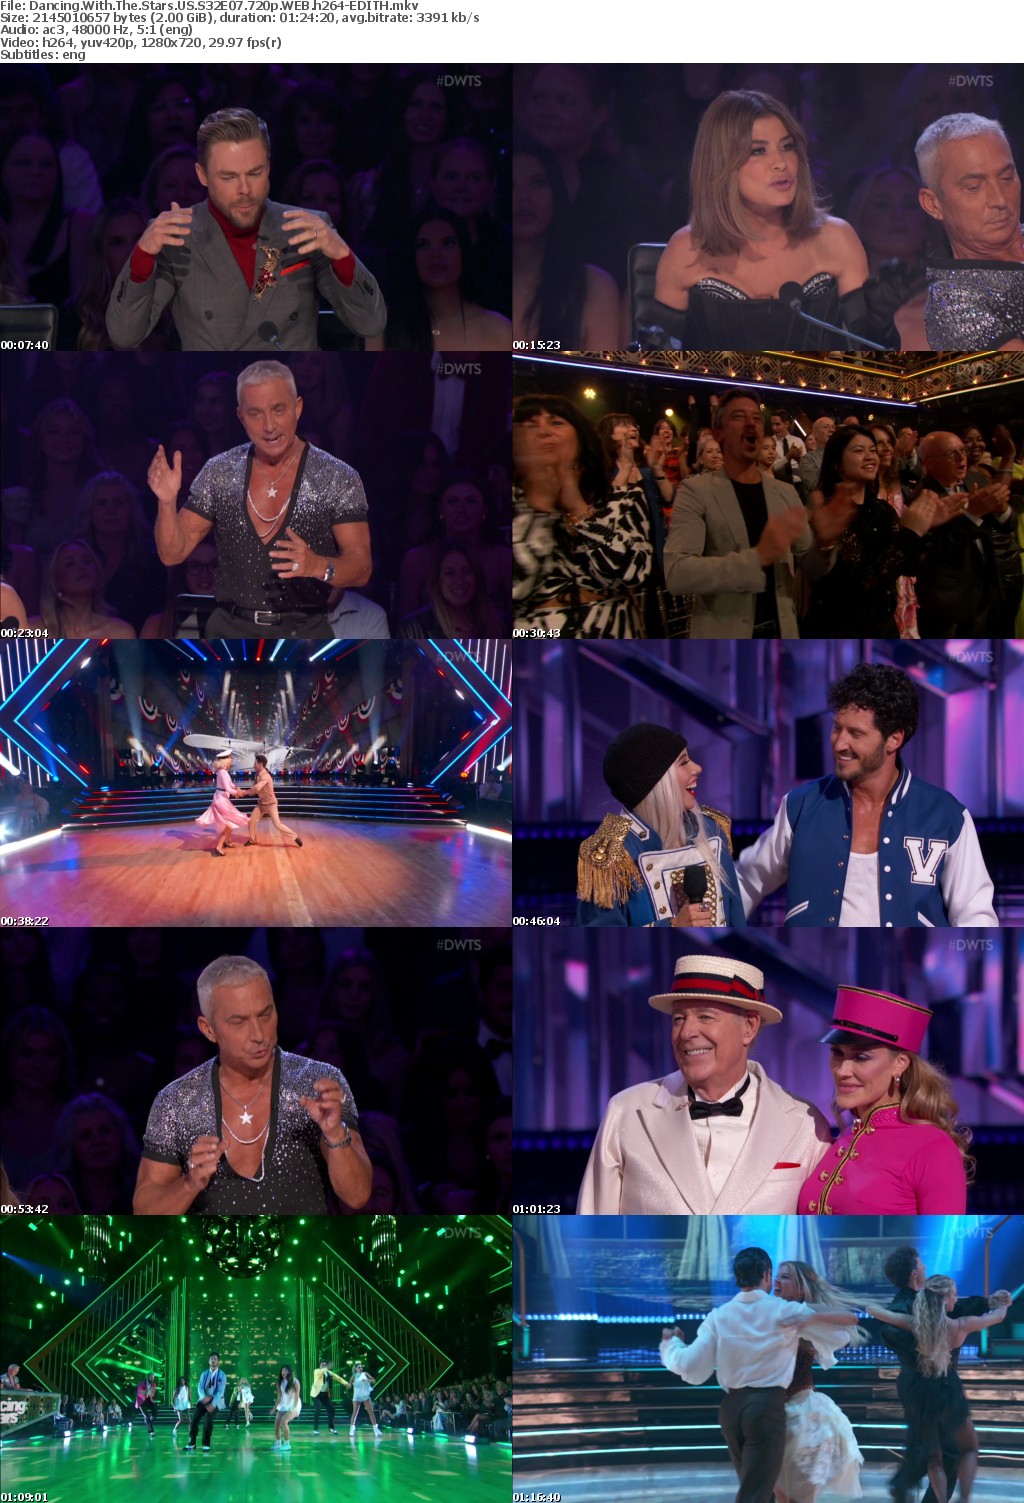 Dancing With The Stars US S32E07 720p WEB h264-EDITH